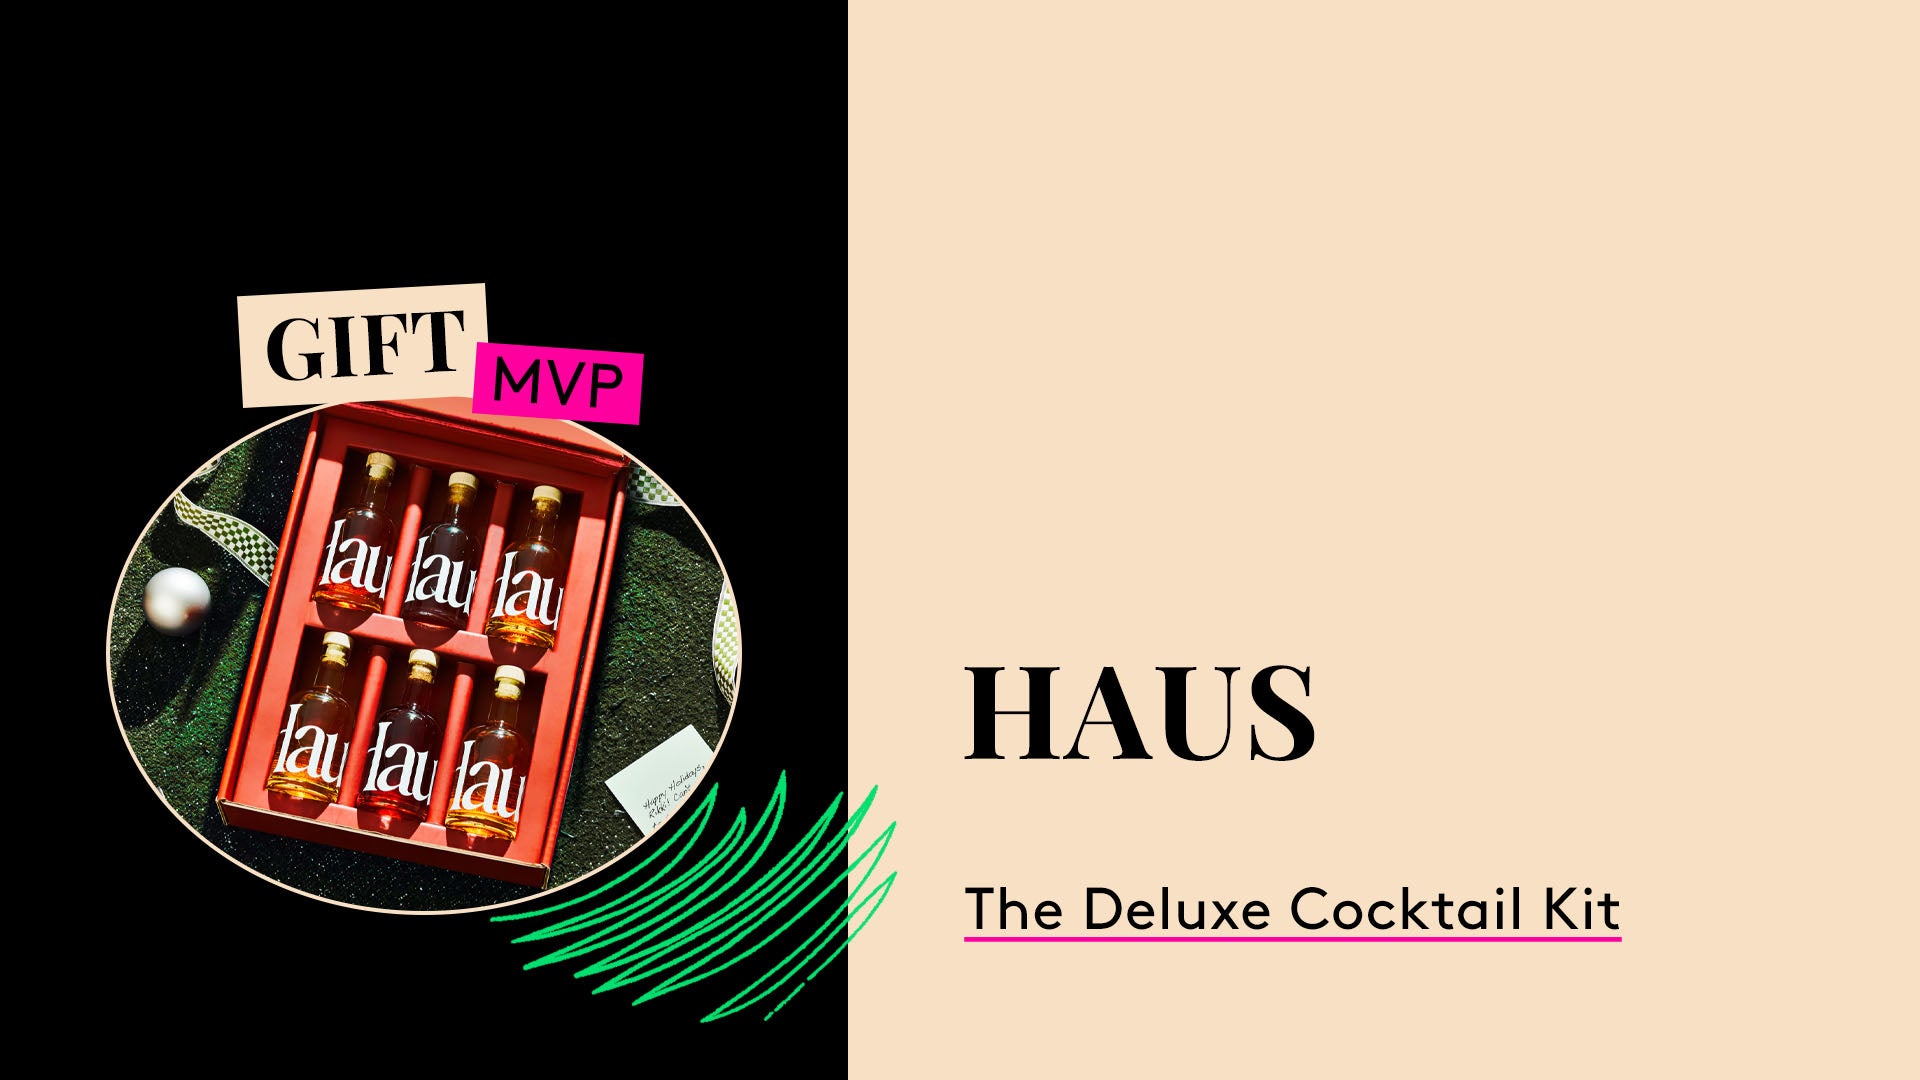 Gift MVP. Haus The Deluxe Cocktail Kit.